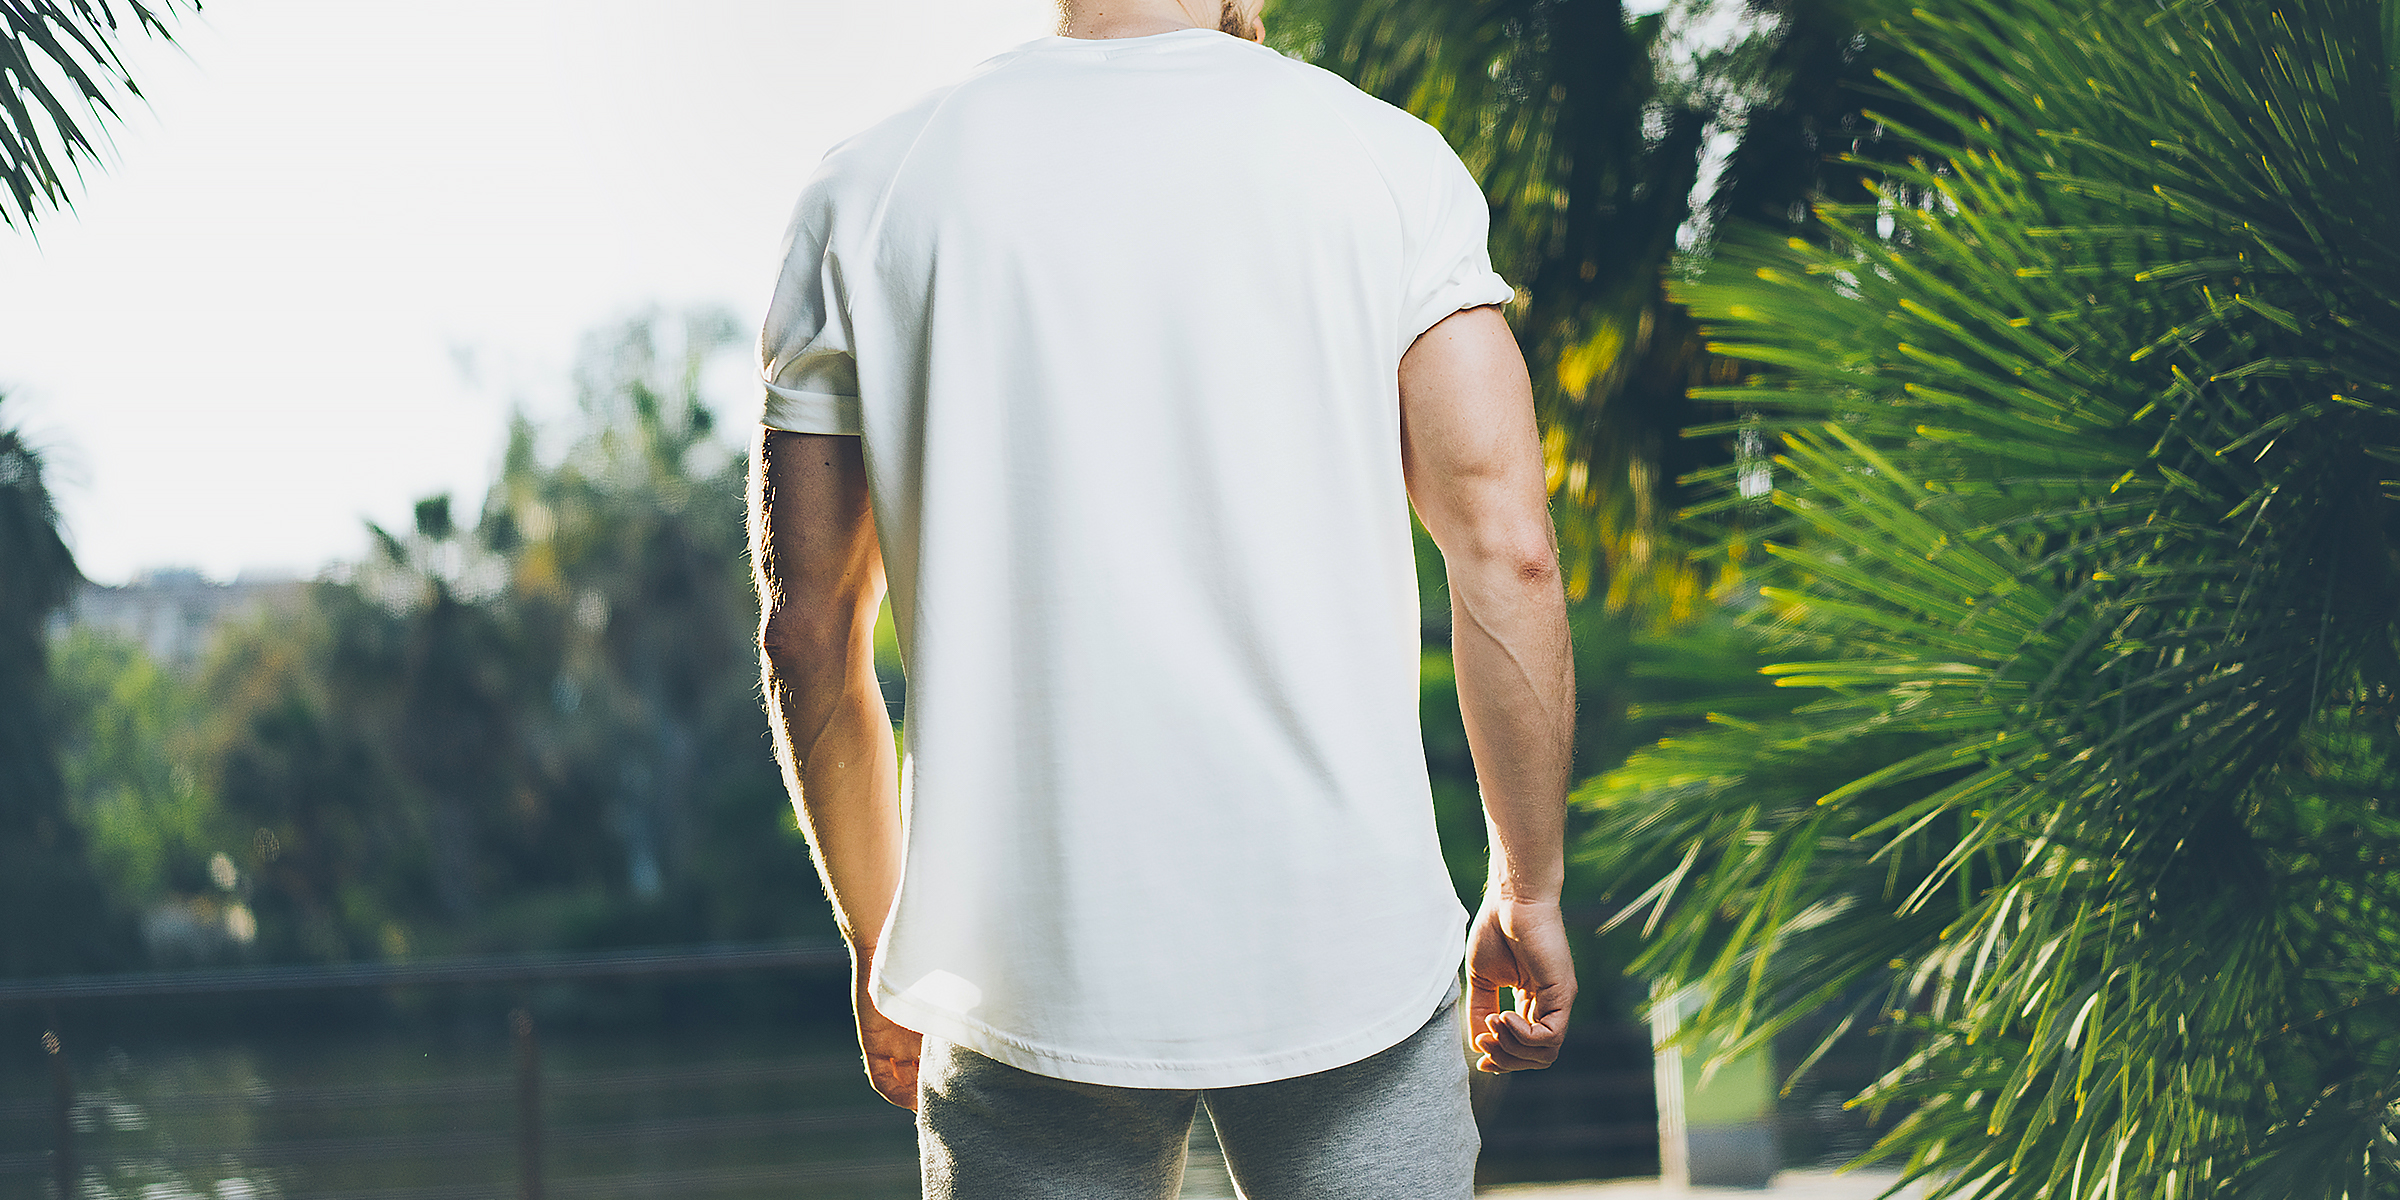 A person wearing a white T-shirt | Source: Shutterstock